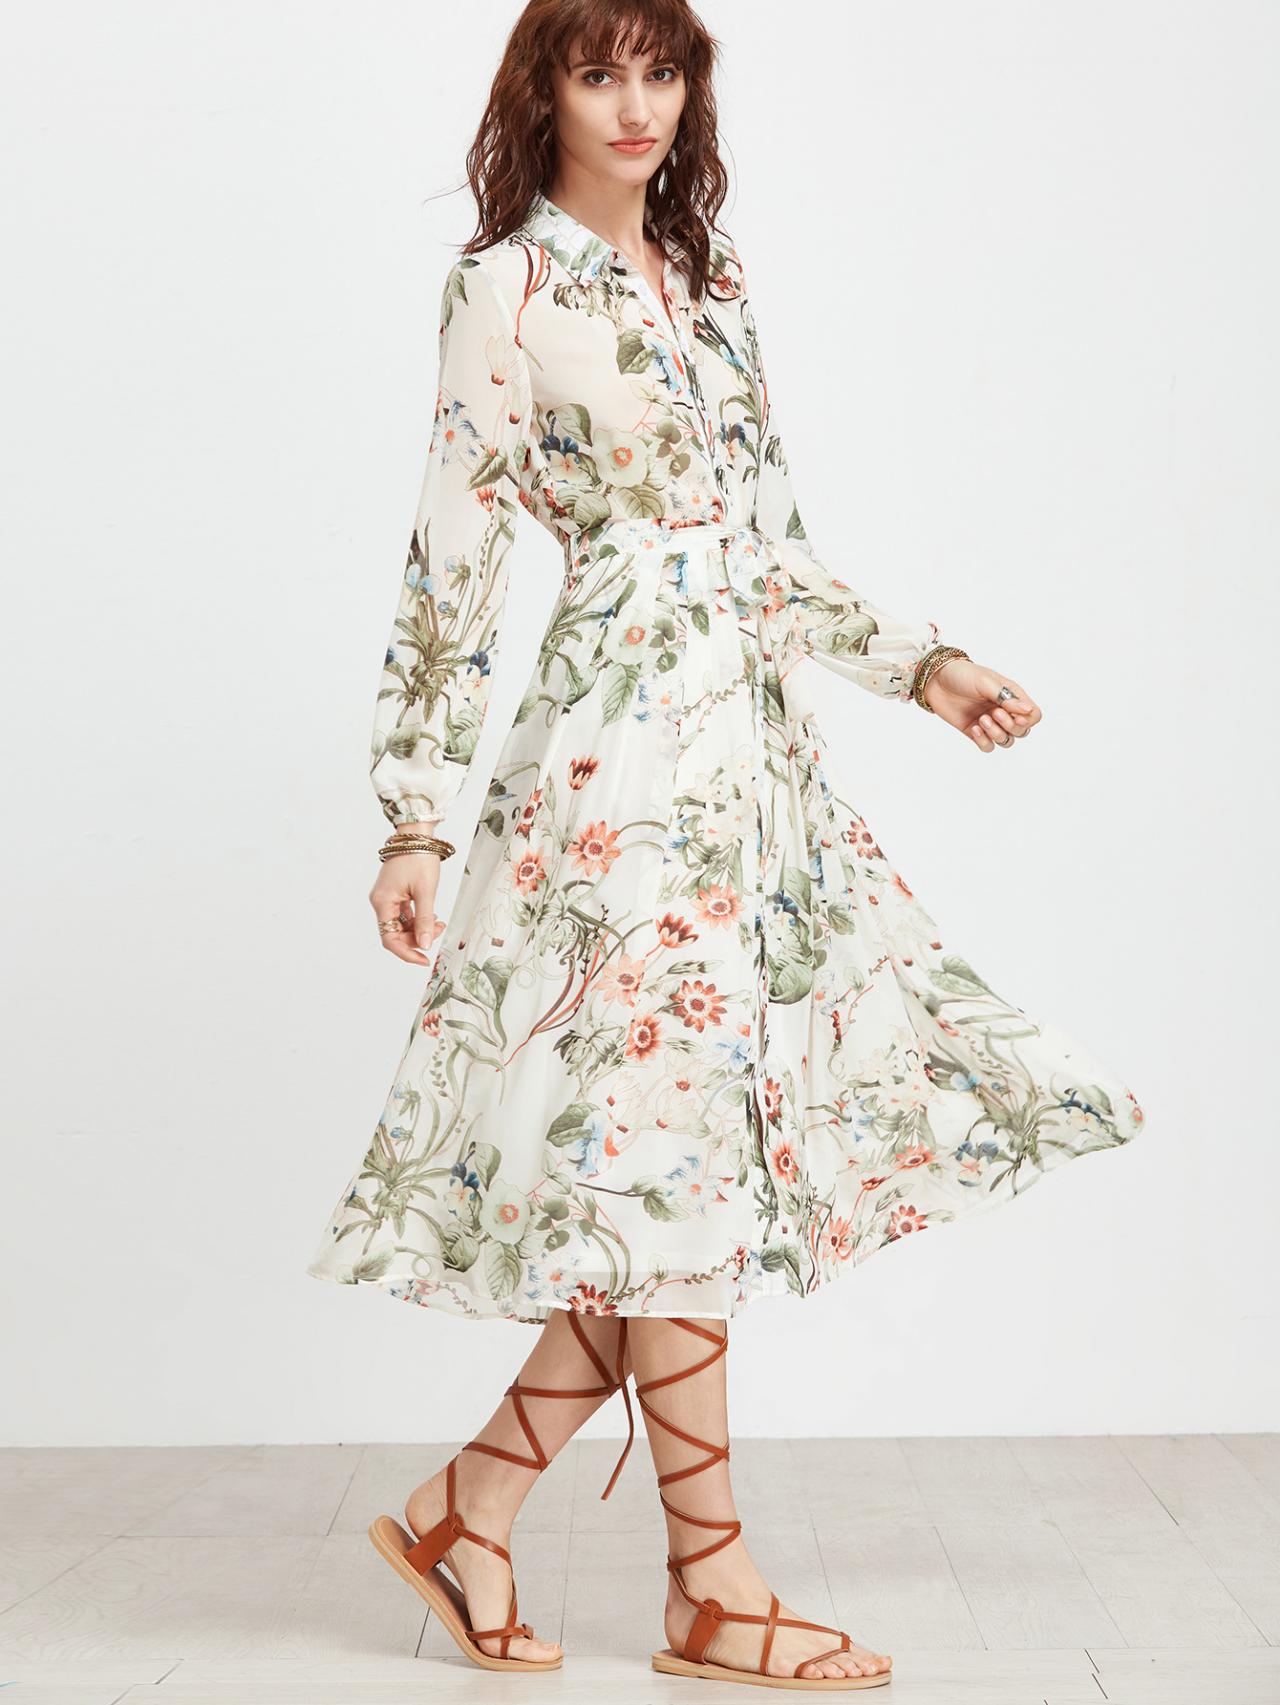 White Chiffon Floral Print Long Sleeve Midi A-line Dress Featuring Bow Accent Waistband And Collar